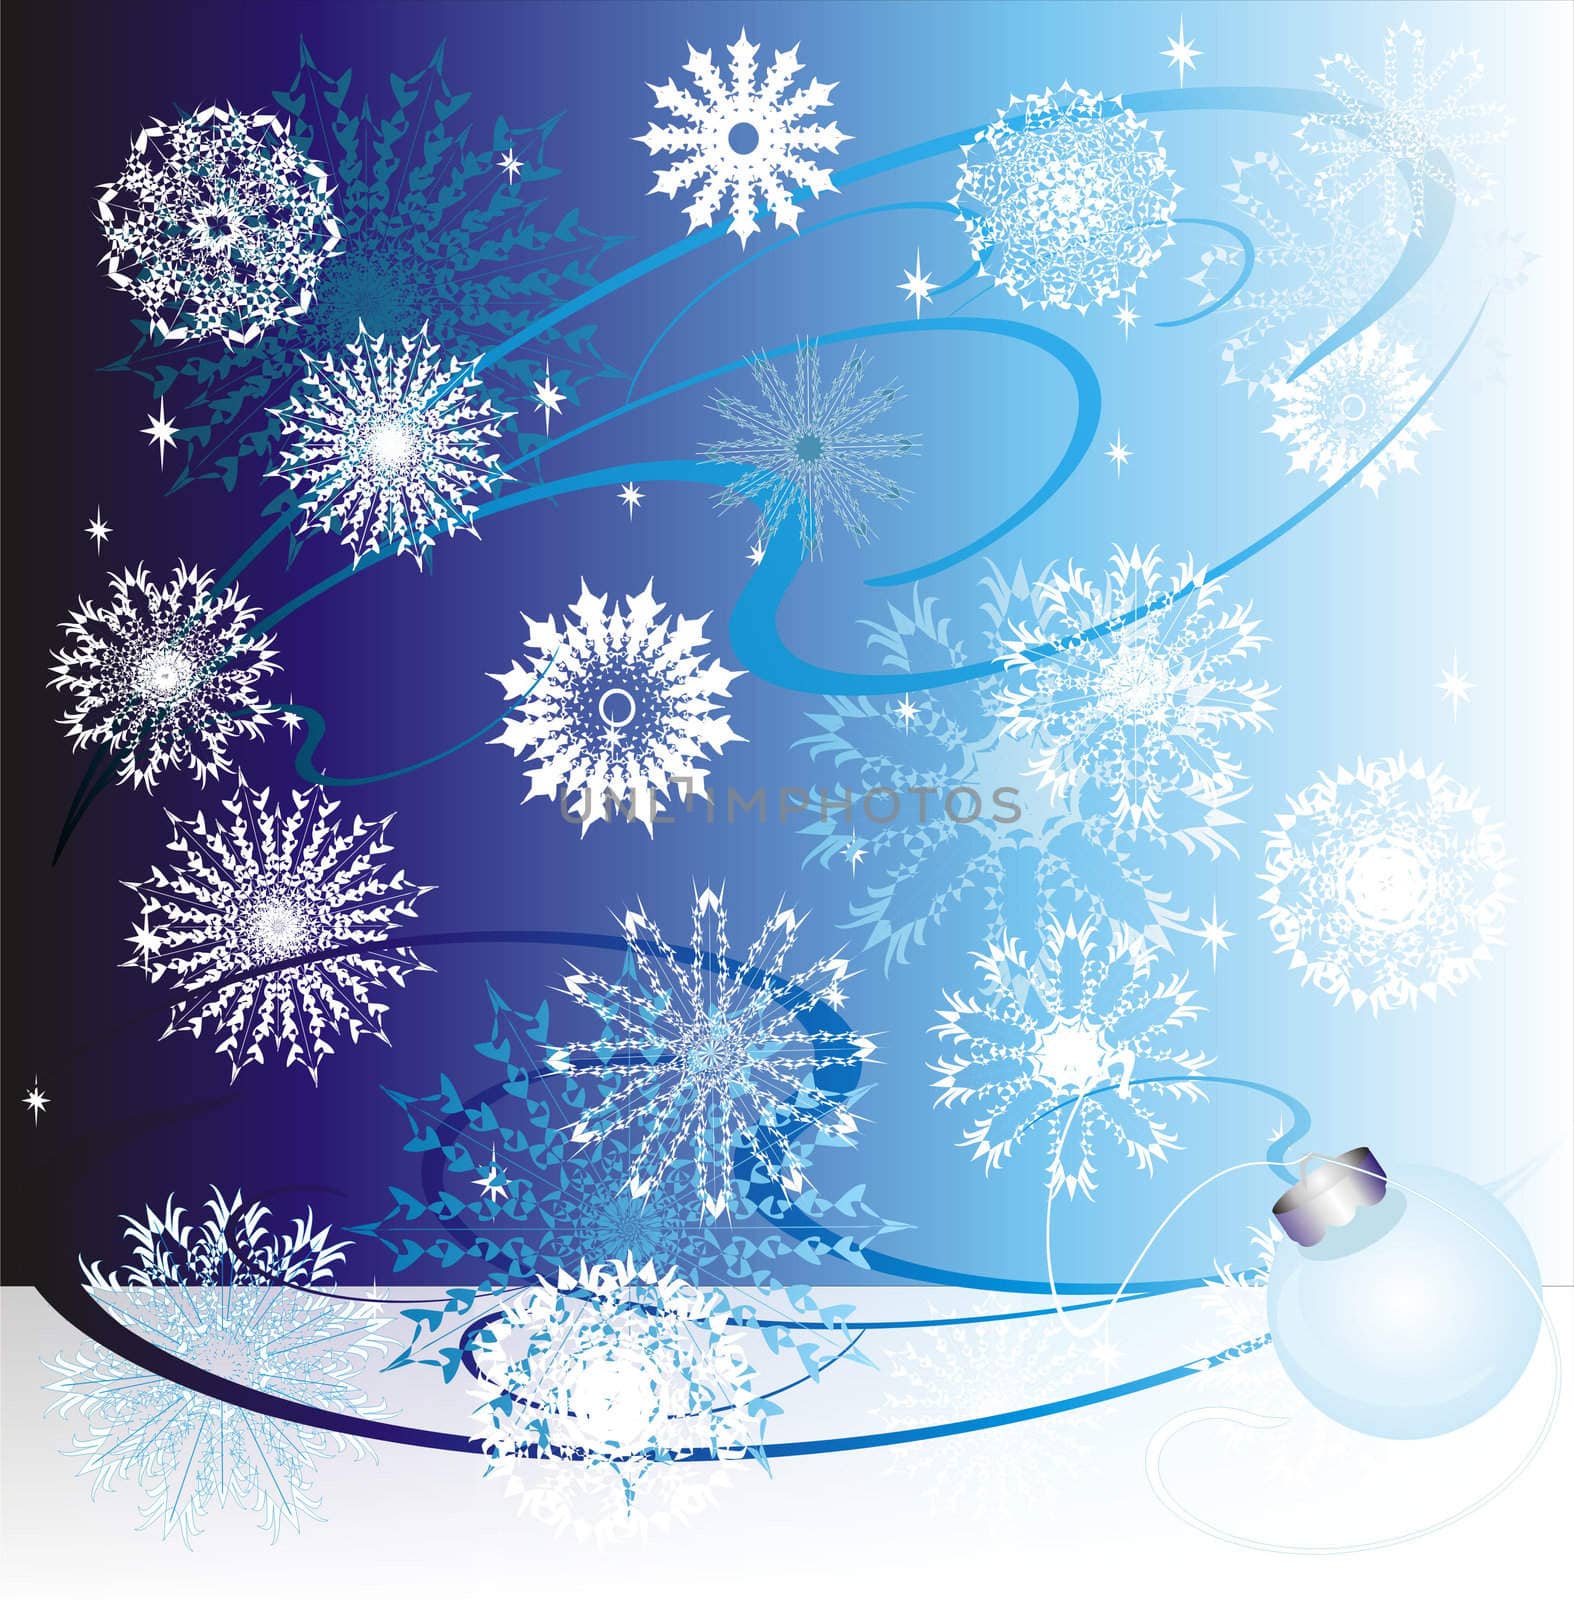 New Year's or Christmas card with a ball and snowflakes